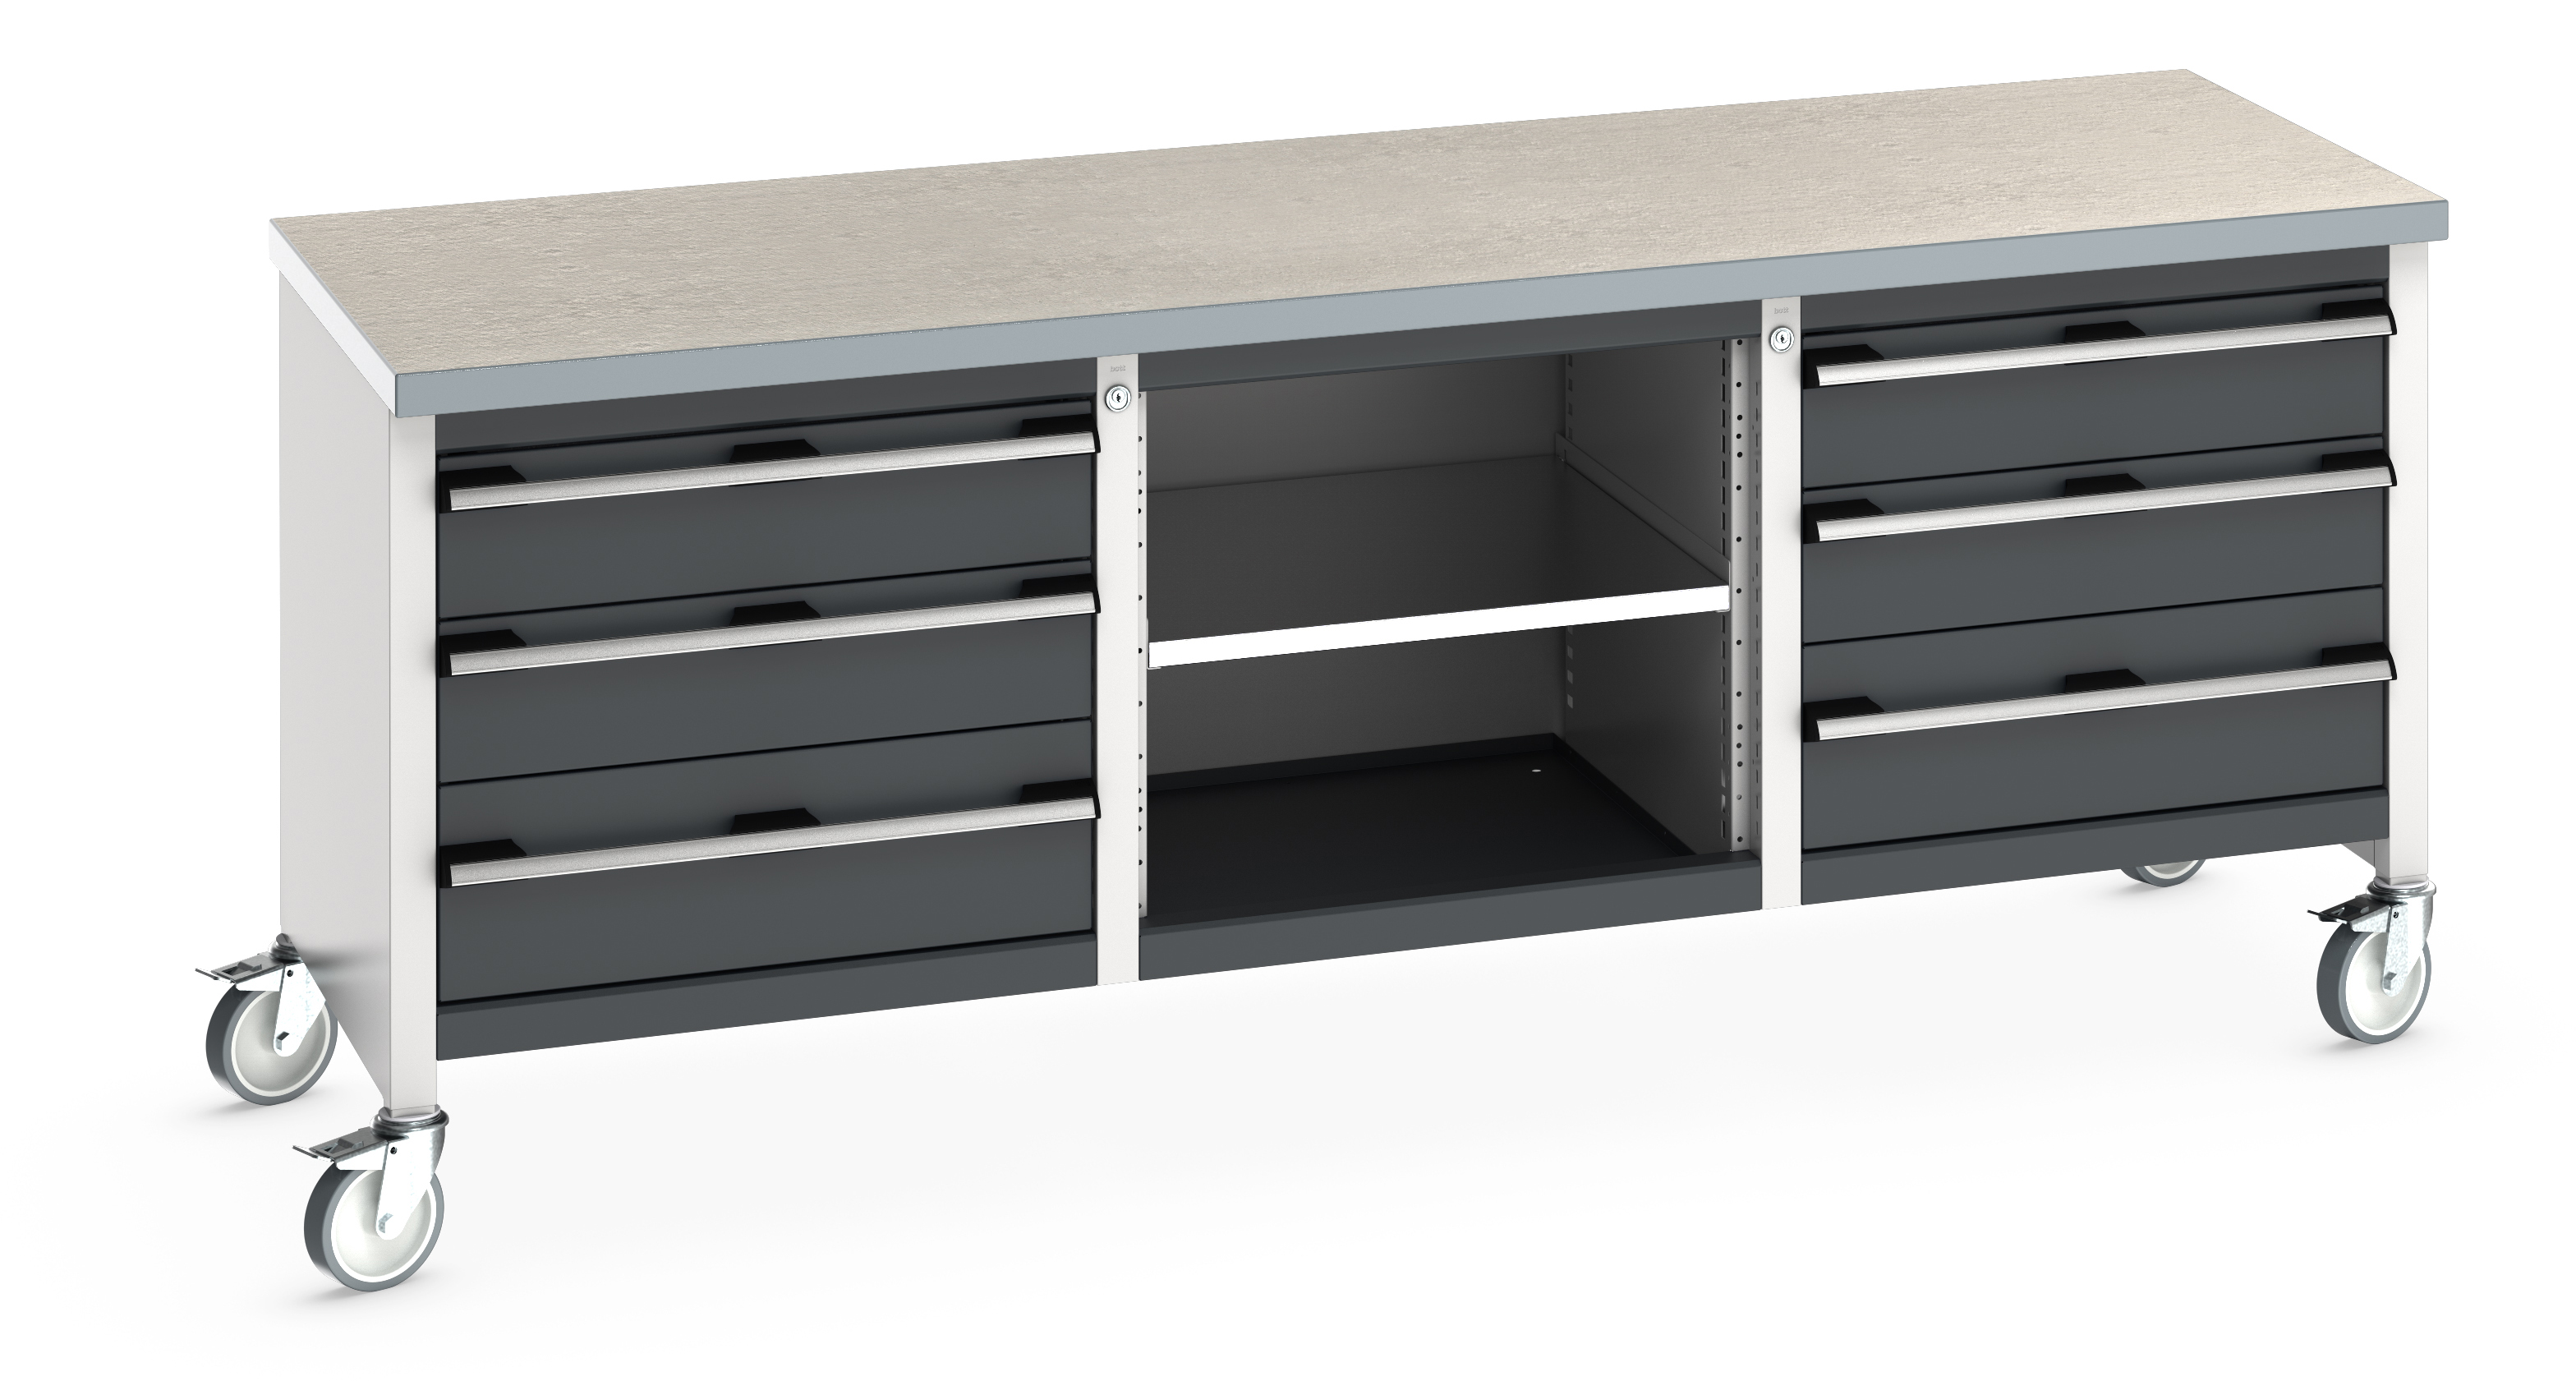 Bott Cubio Mobile Storage Bench With 3 Drawer Cabinet / Open Cupboard / 3 Drawer Cabinet - 41002132.19V